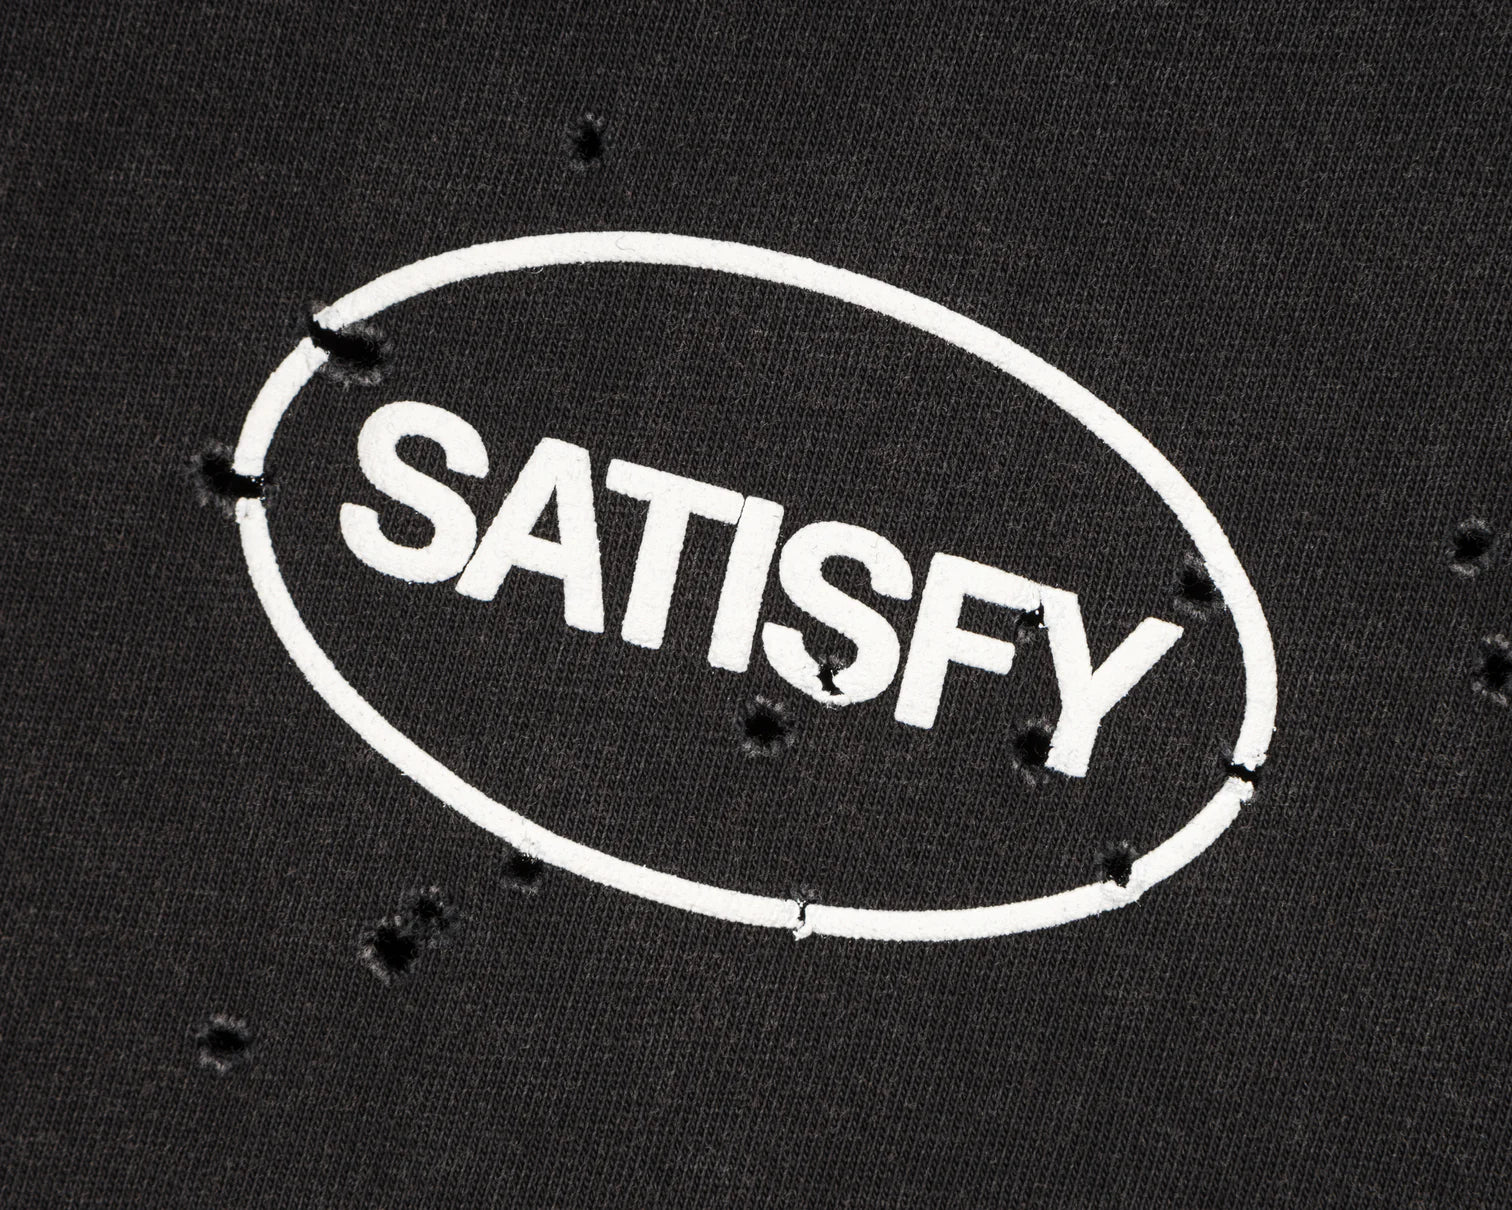 SATISFY - MothTech T-shirt - Aged Black - Space Camp